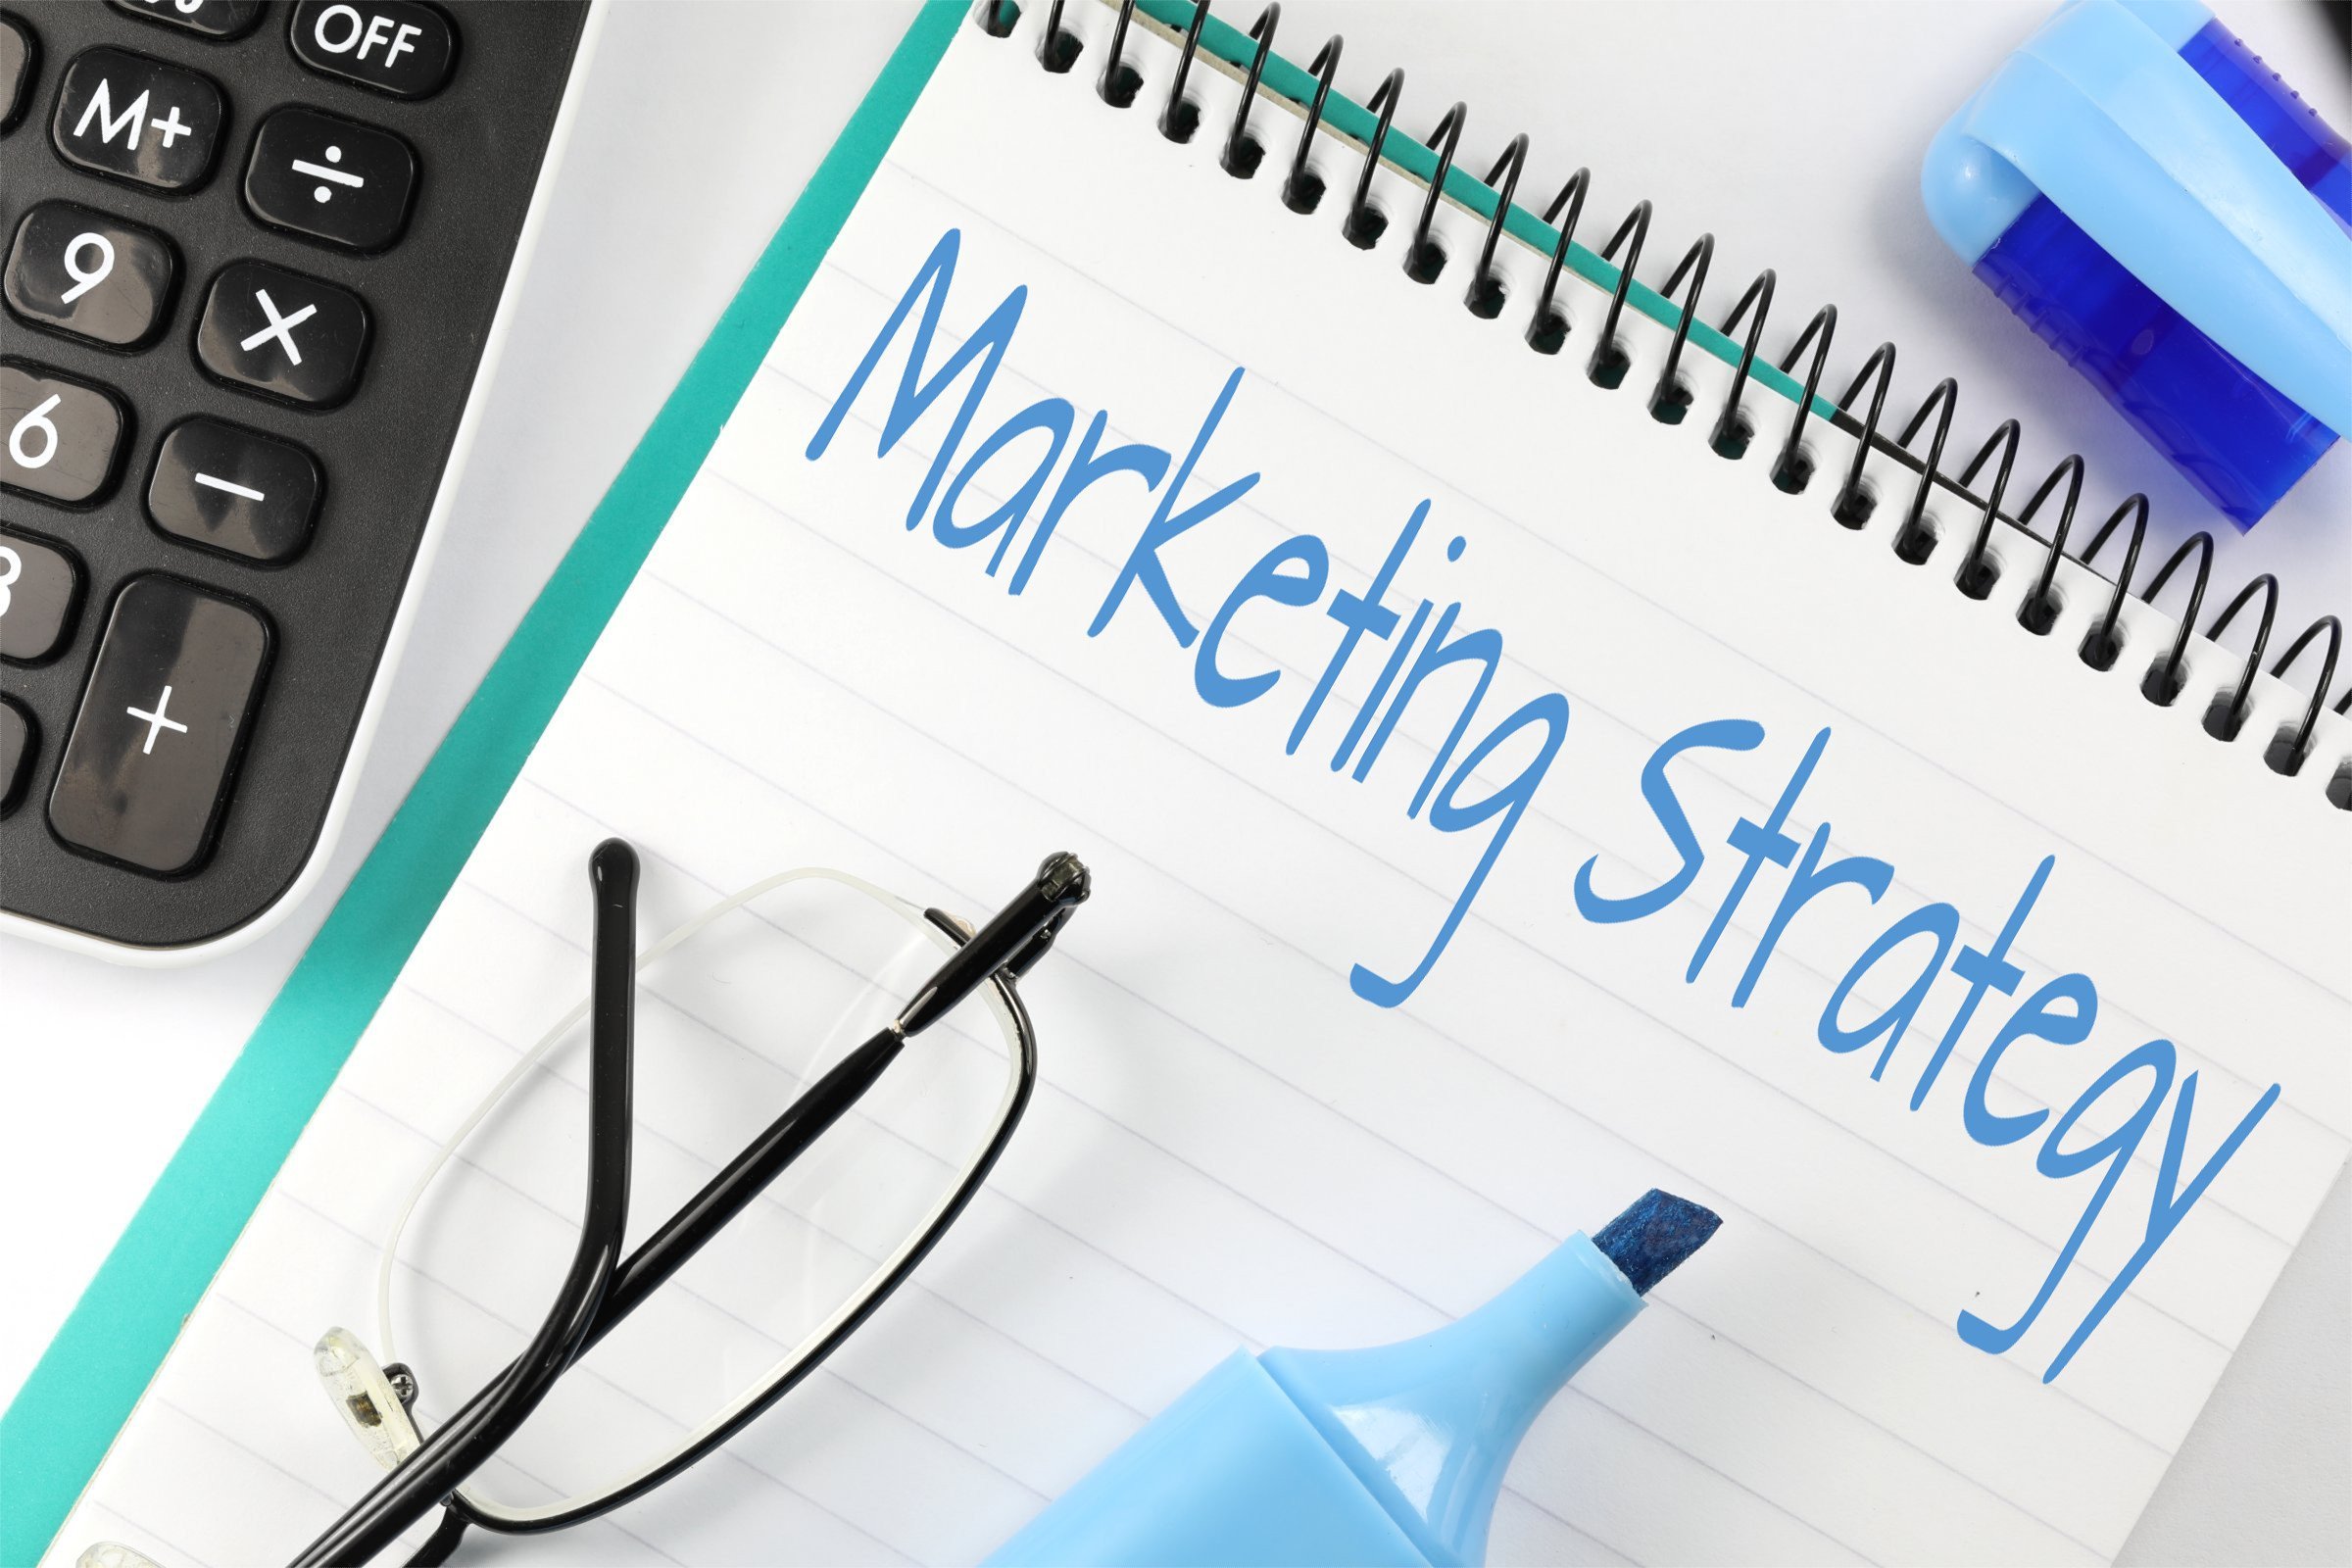 7 Strategies for Marketing that Make a Business’s Brand Stand-out